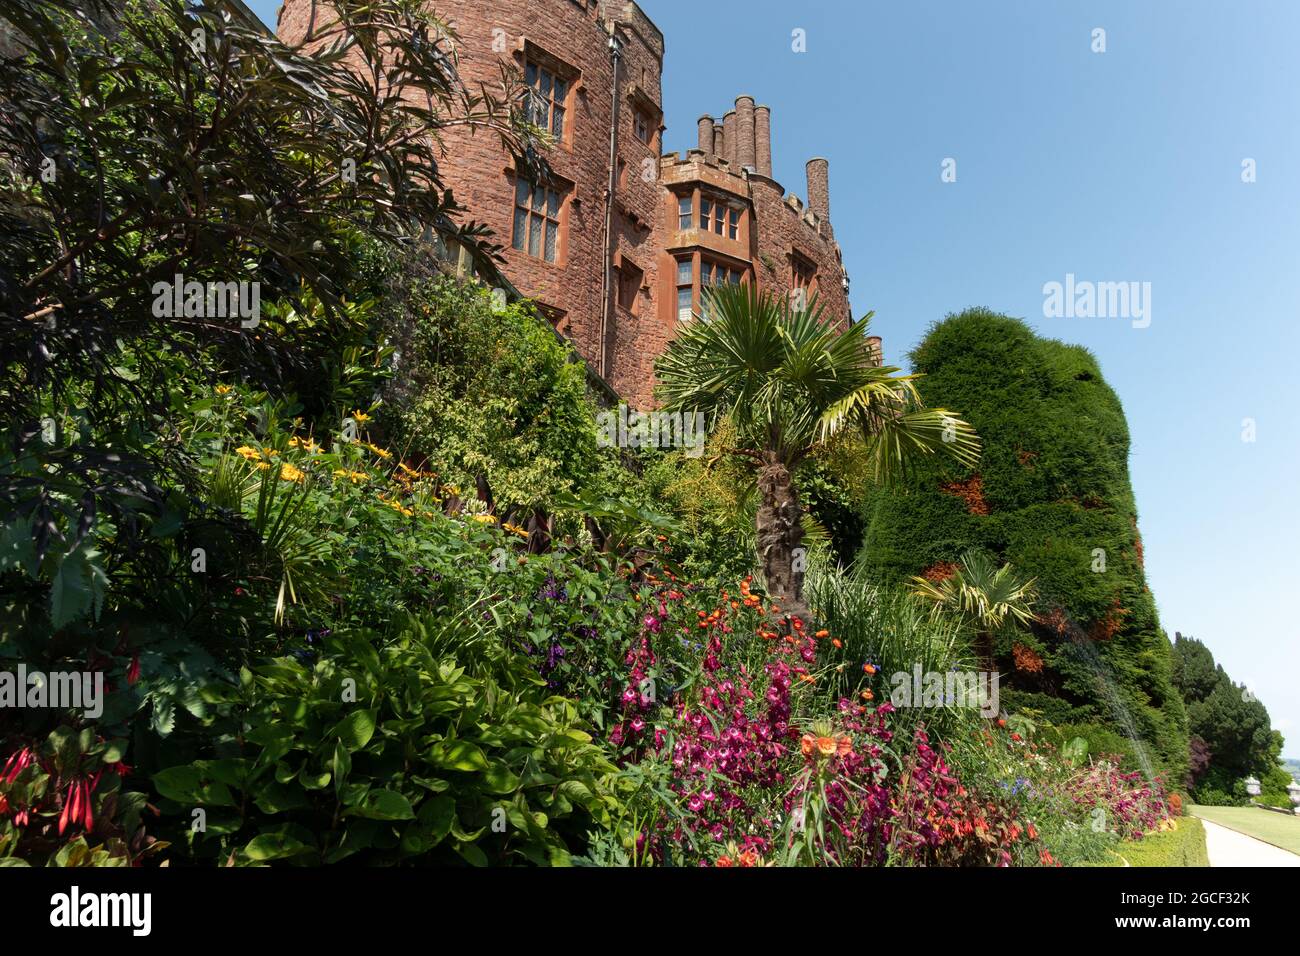 A view of the castle and gardens at Powis Castle, Wales - a Ntional Trust property. Stock Photo